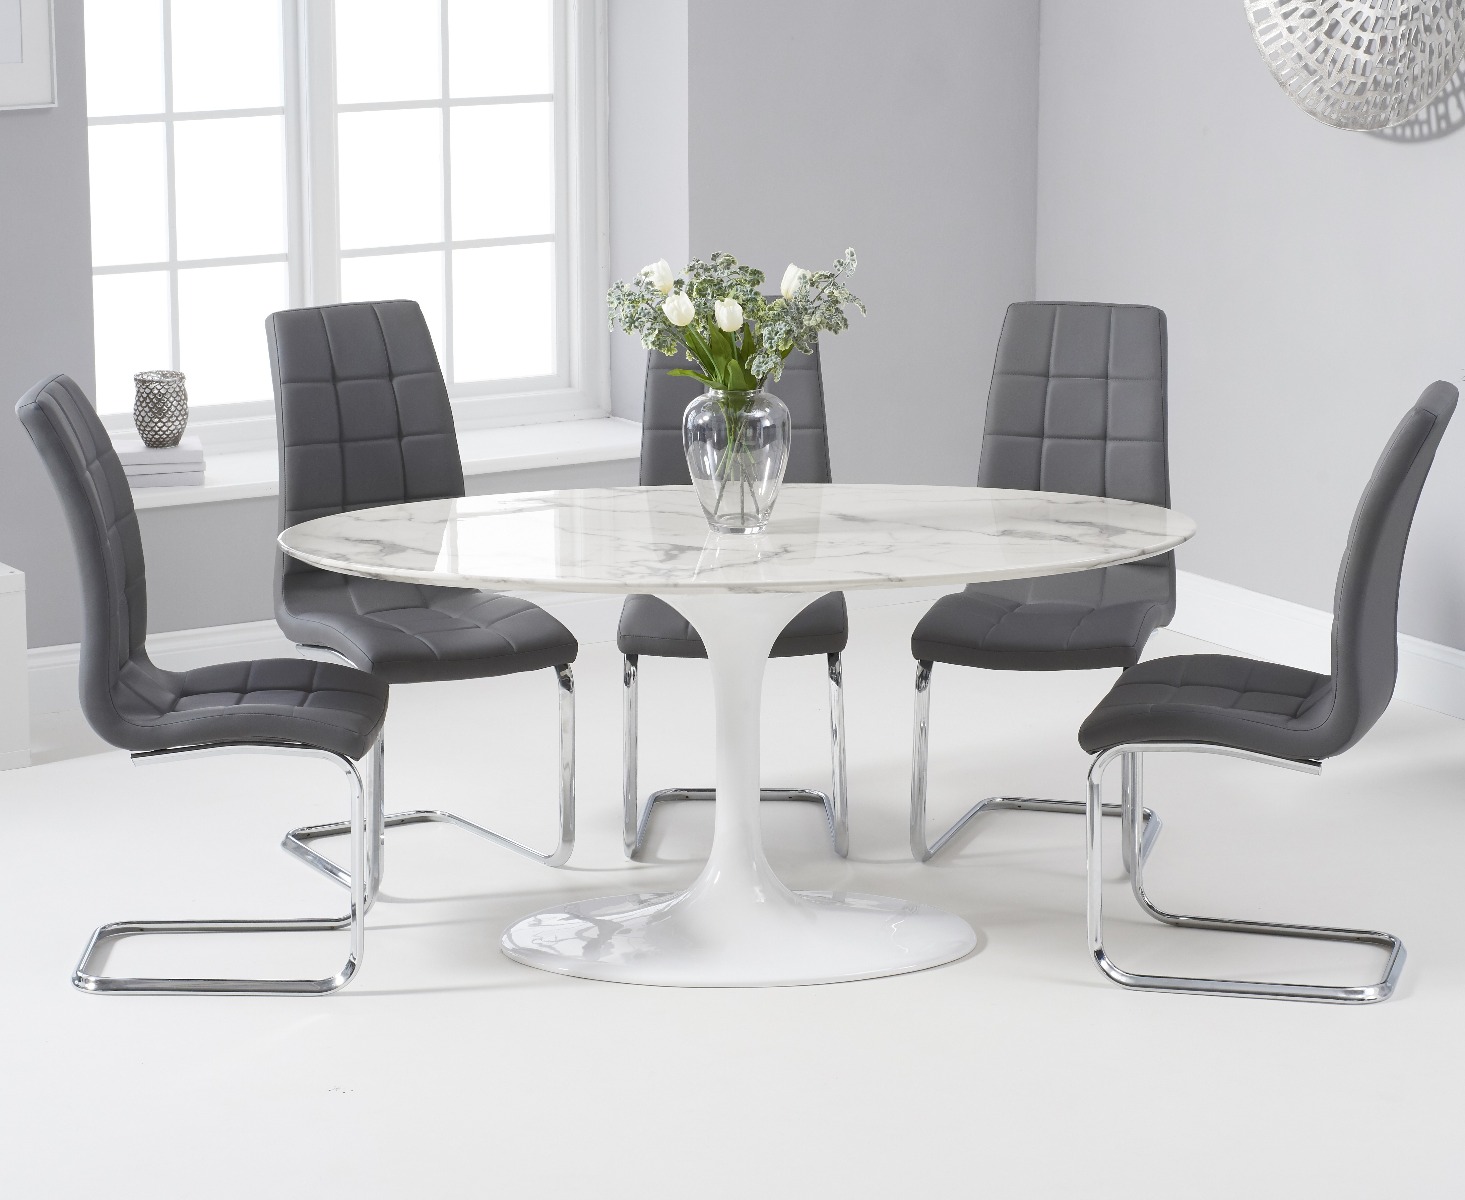 Brighton 160cm Oval White Marble Dining Table With 4 Black Vigo Dining Chairs